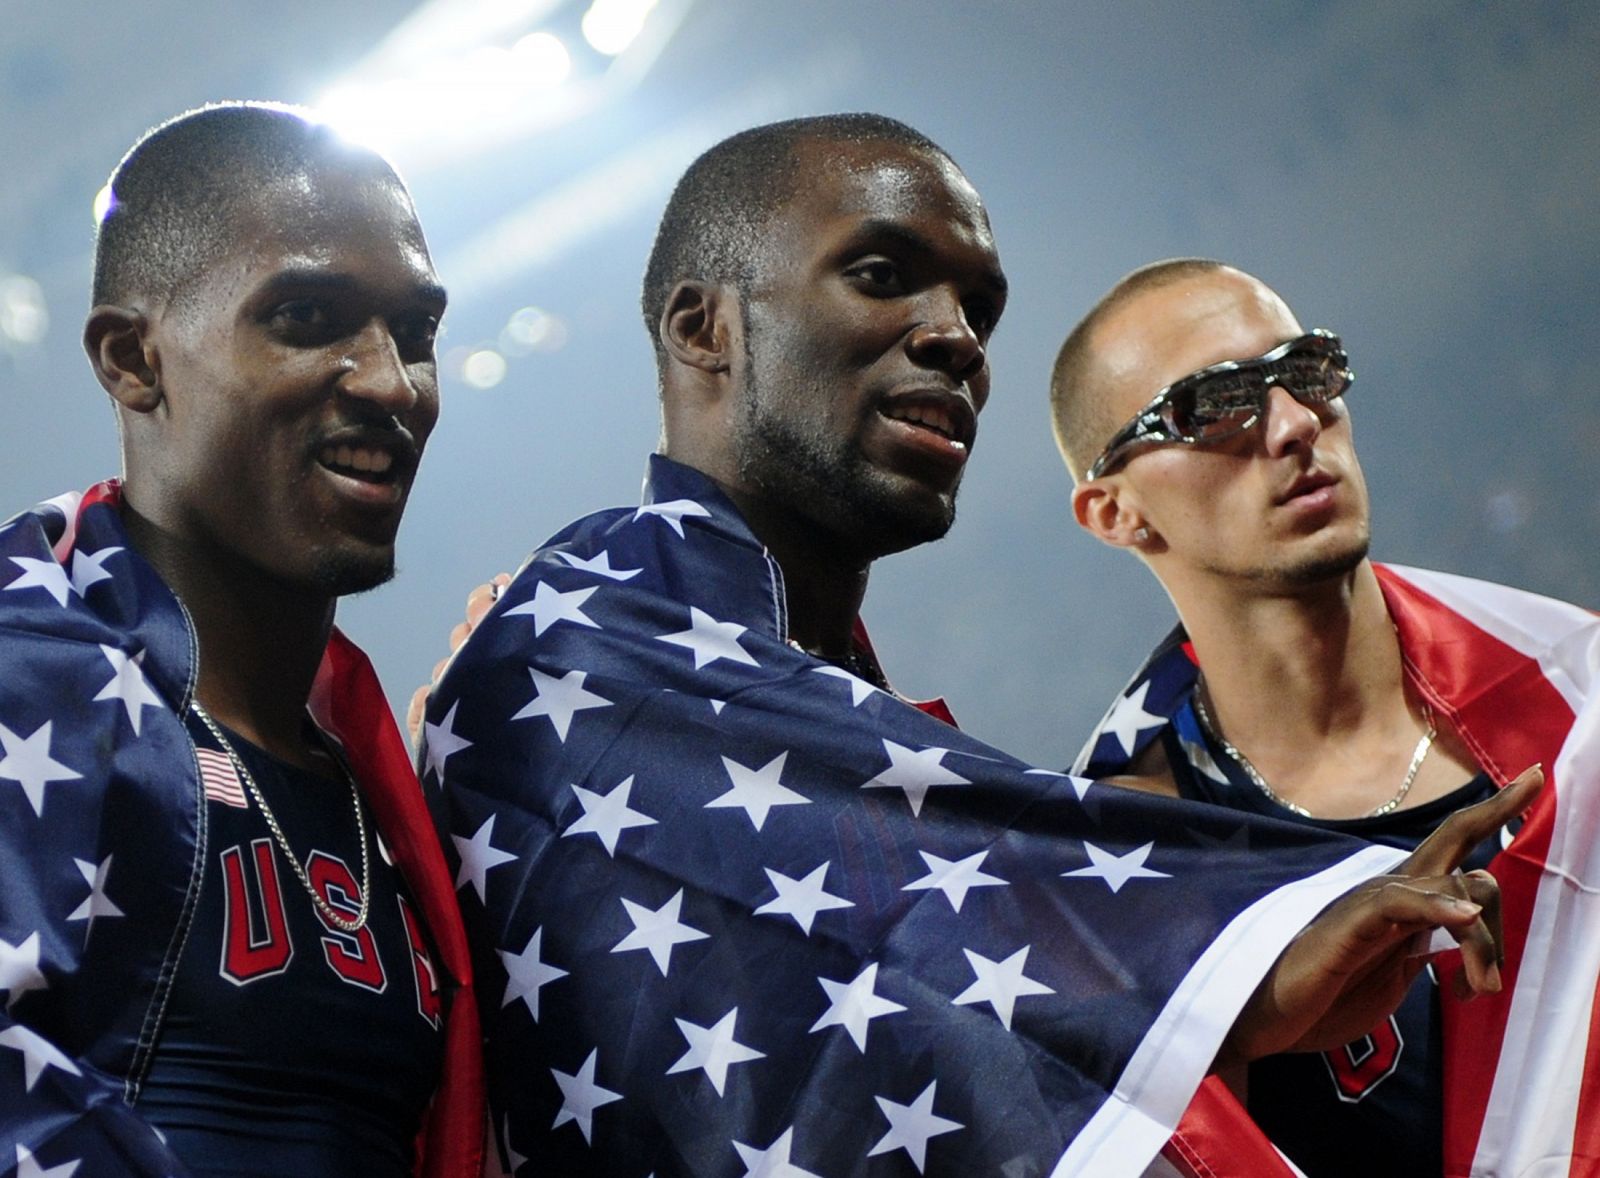 Neville of the U.S. and compatriots Merritt and Wariner celebrate after the men's 400m athletics final in the National Stadium at the Beijing 2008 Olympic Games